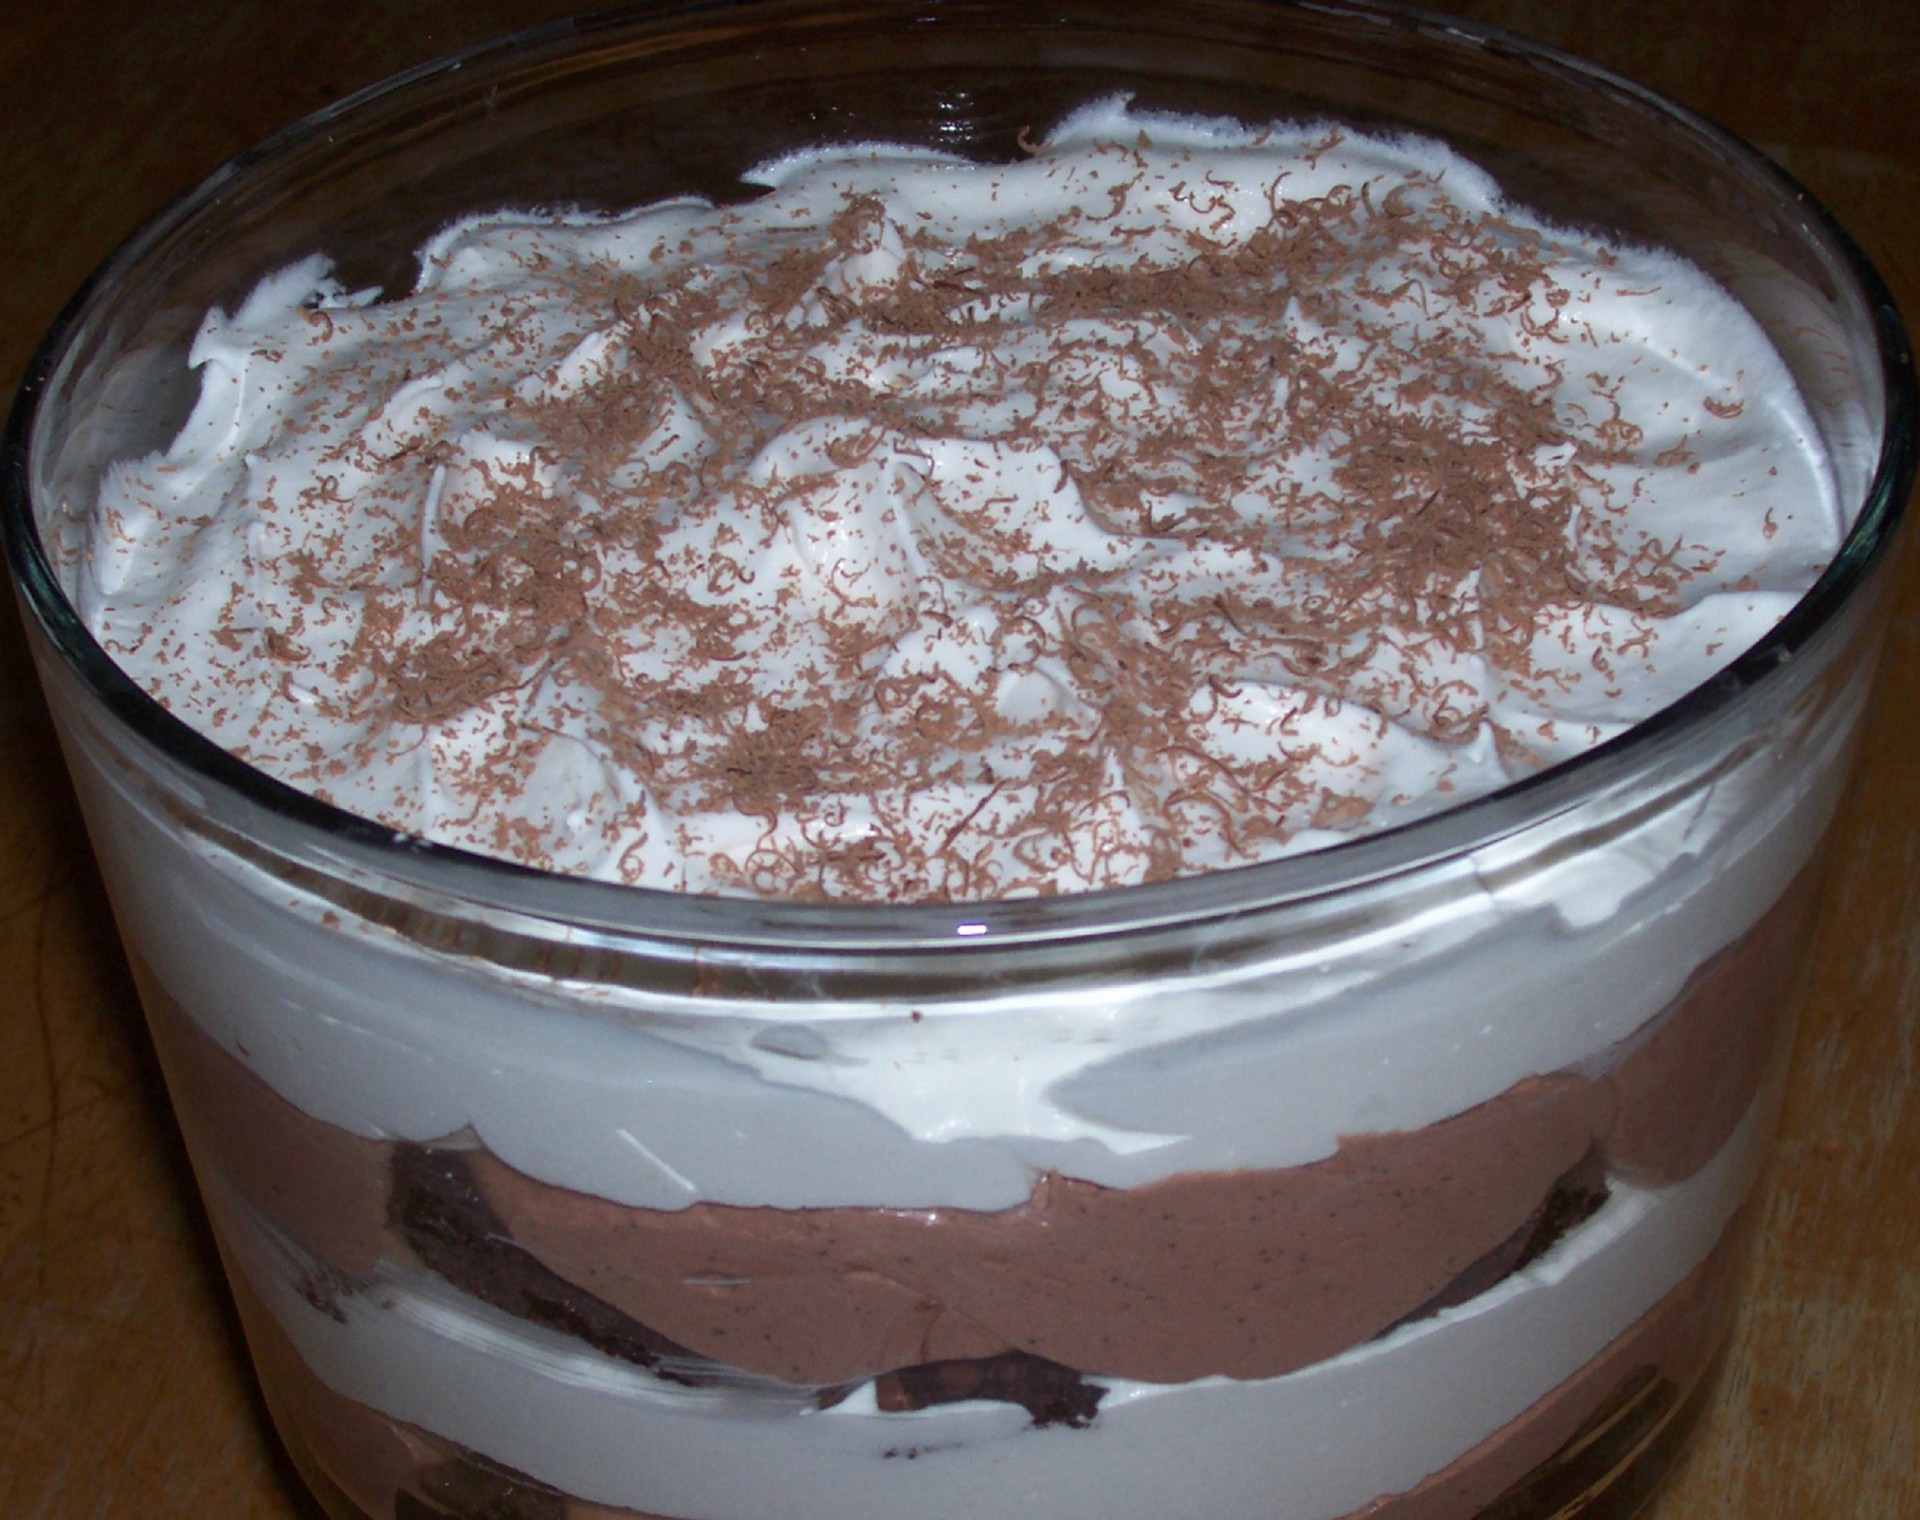 Pampered Chef Double Chocolate Mocha Trifle